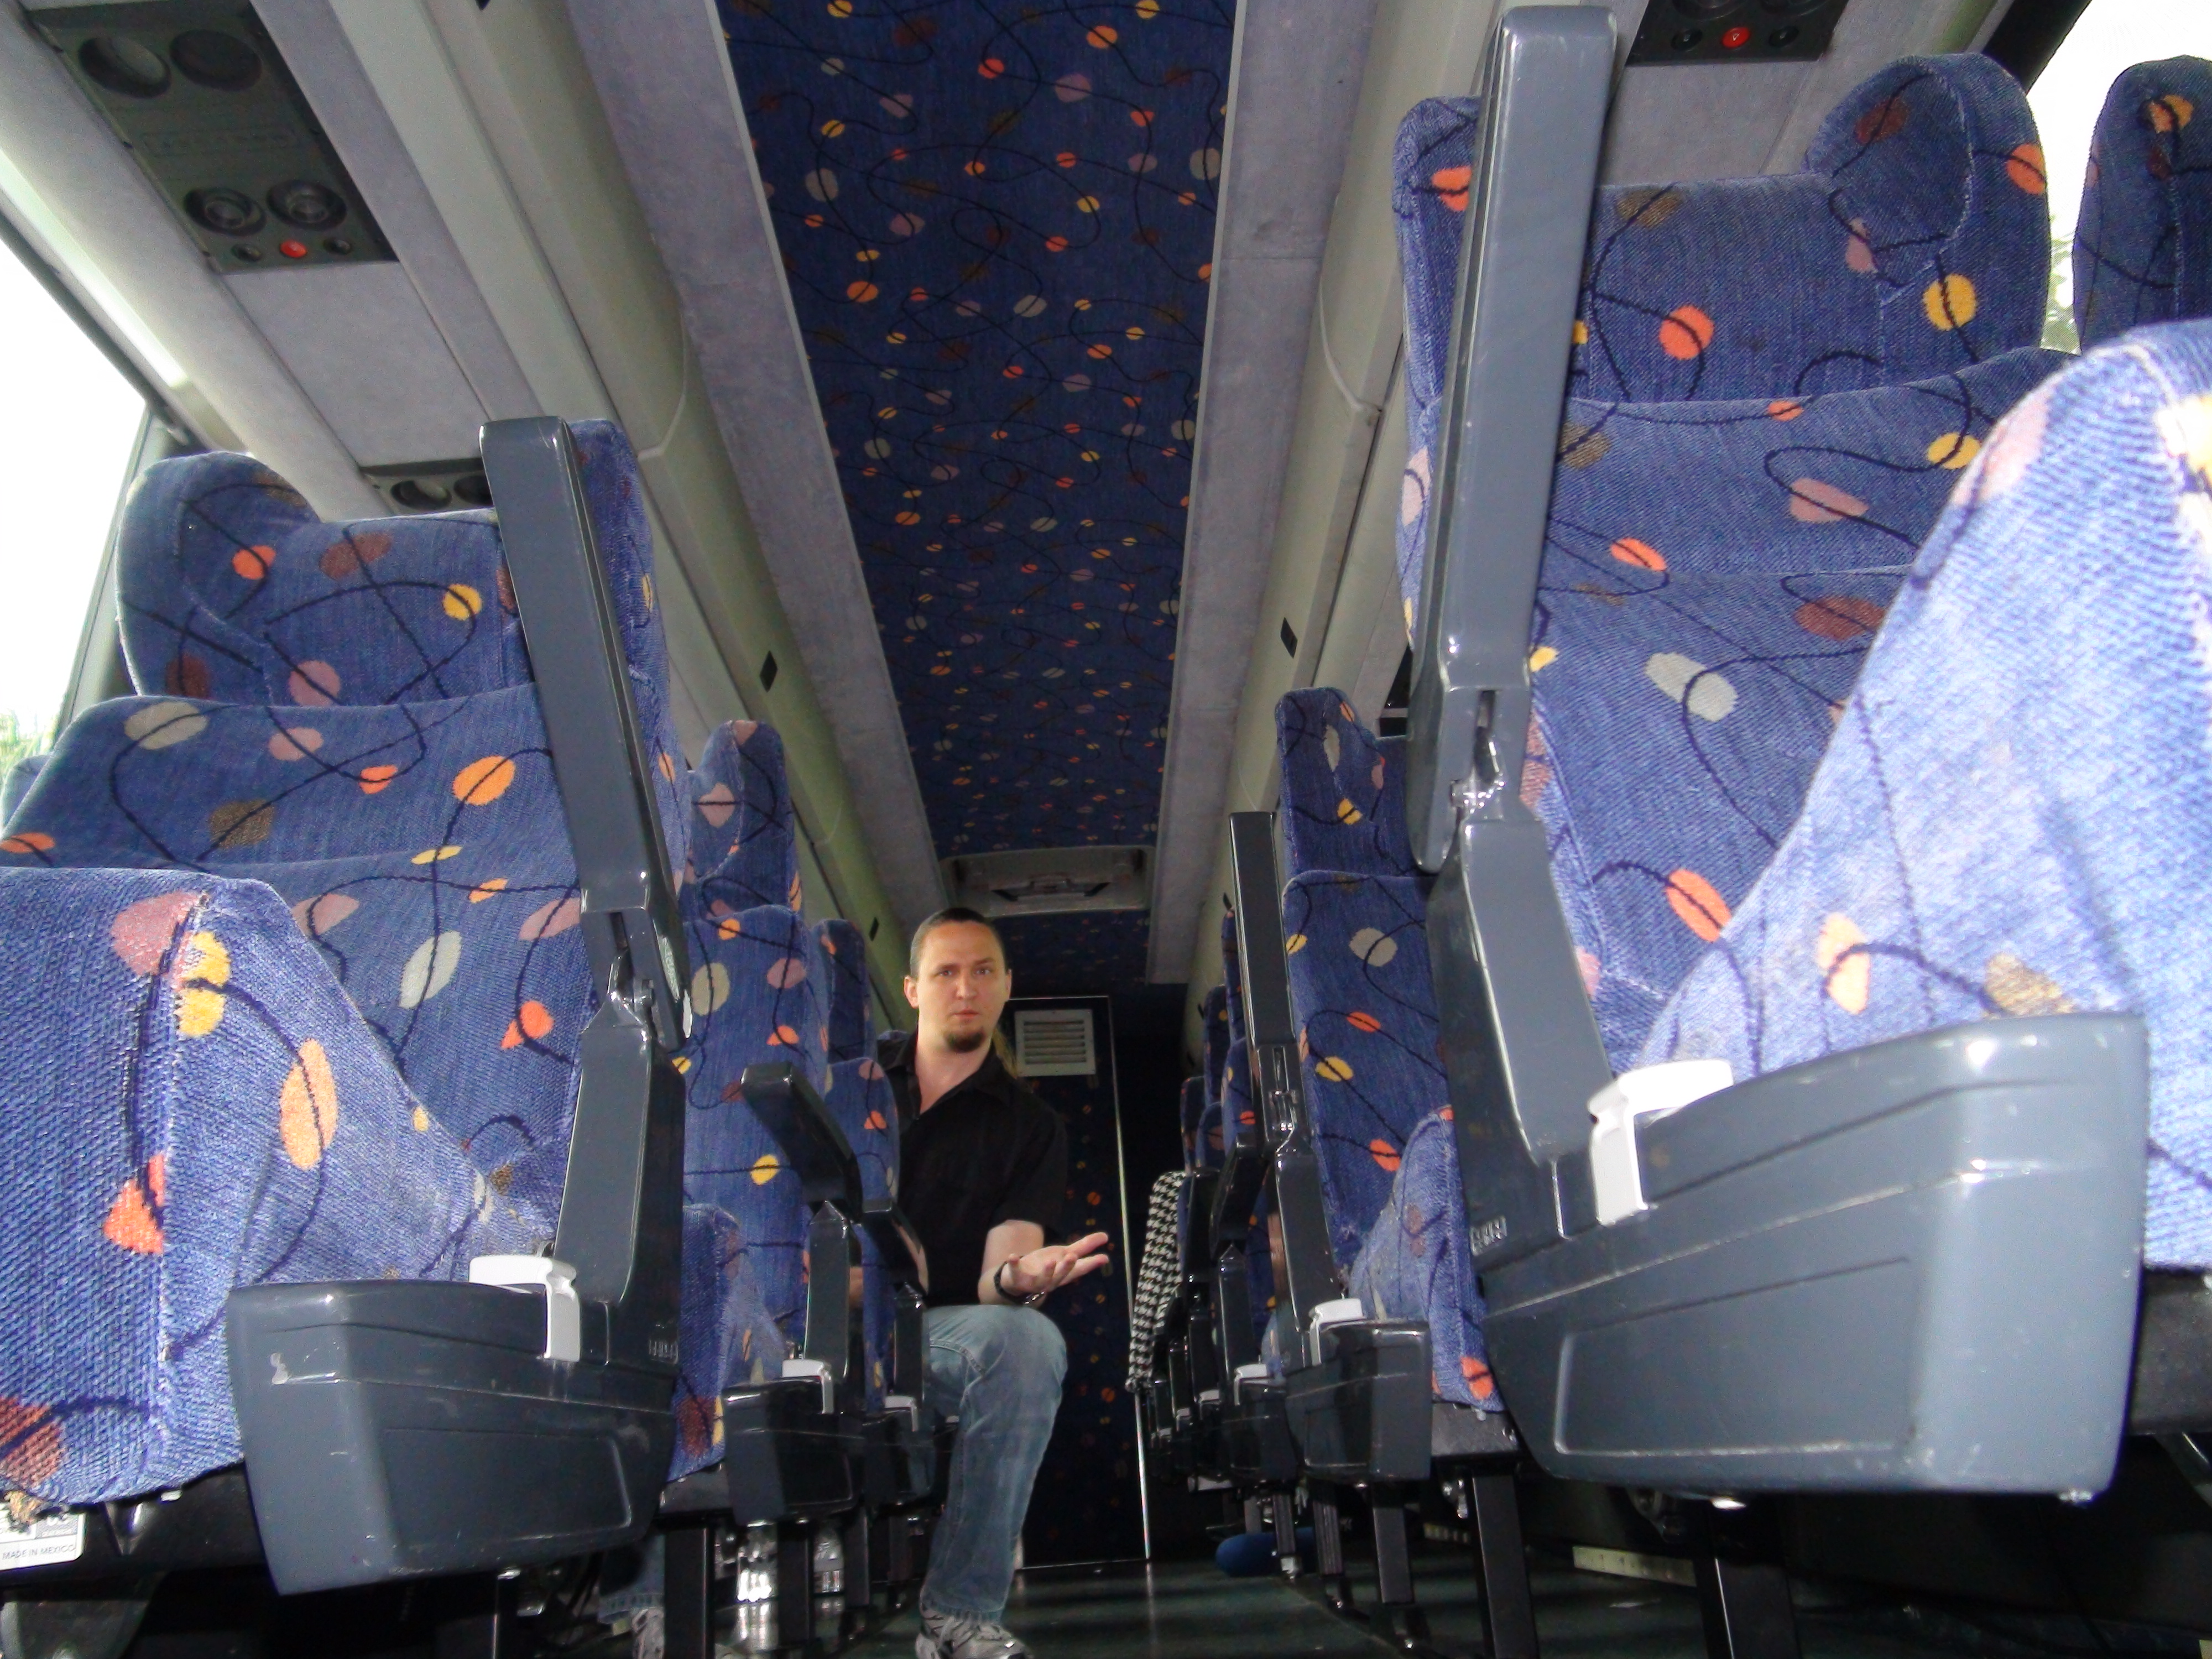 Being the first one on the tour bus